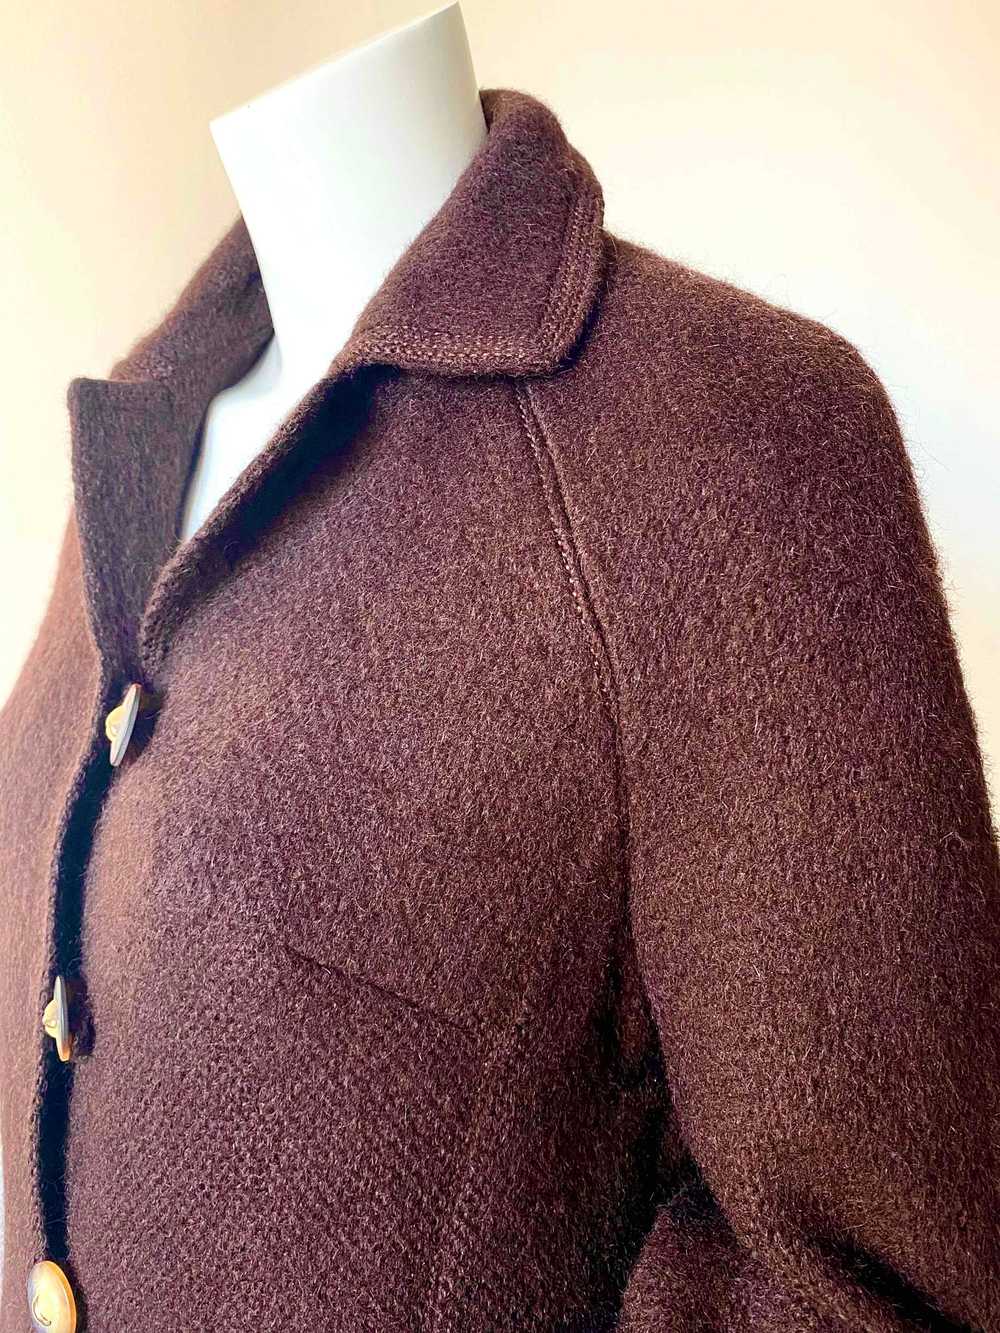 Wool jacket - Cropped knitted mohair jacket - image 9